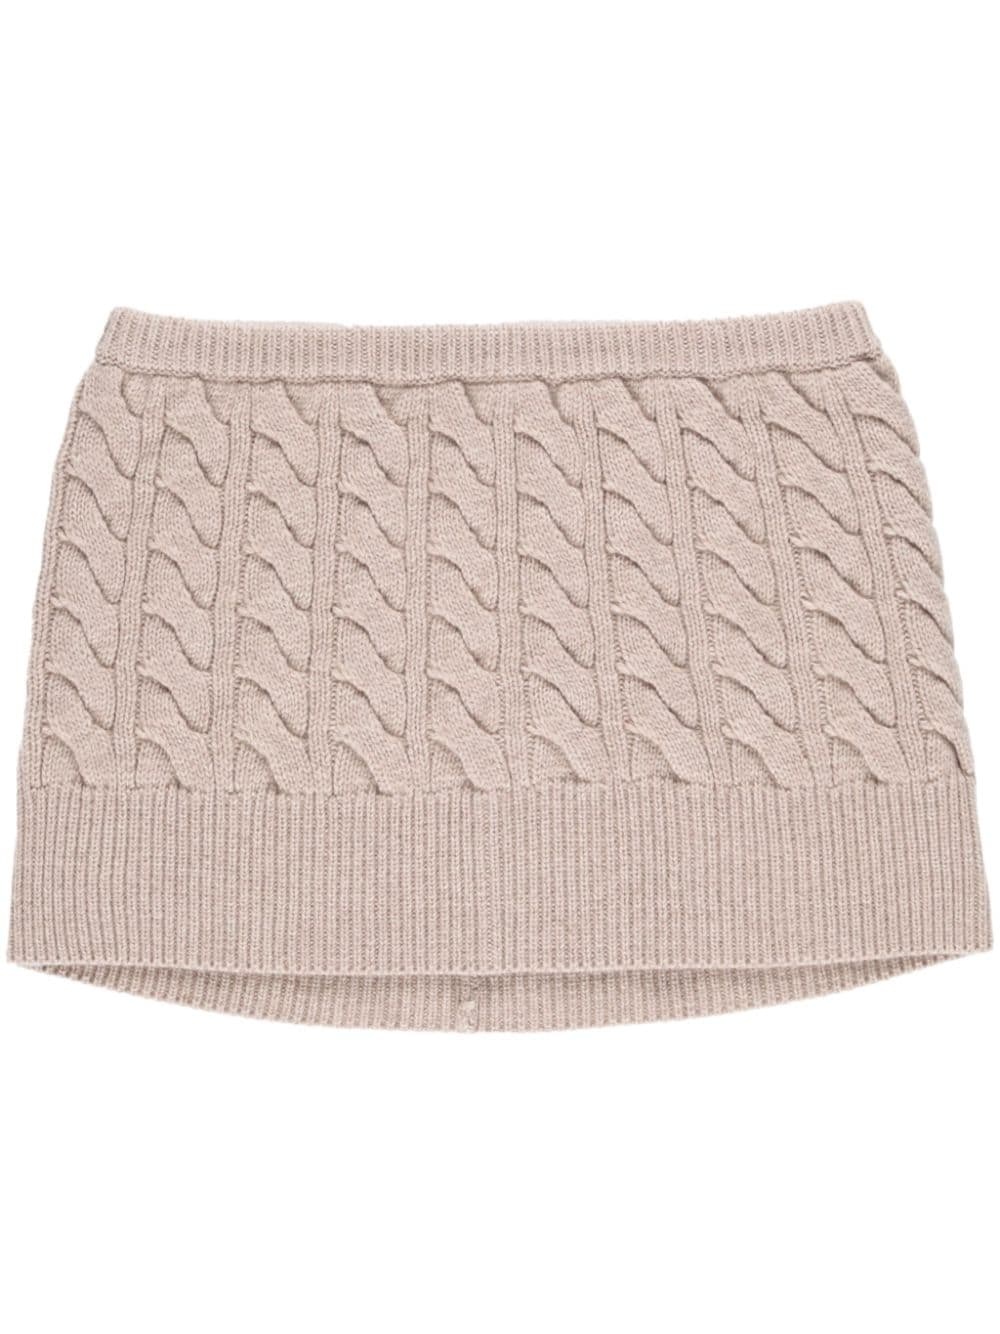 cable-knit miniskirt - 1